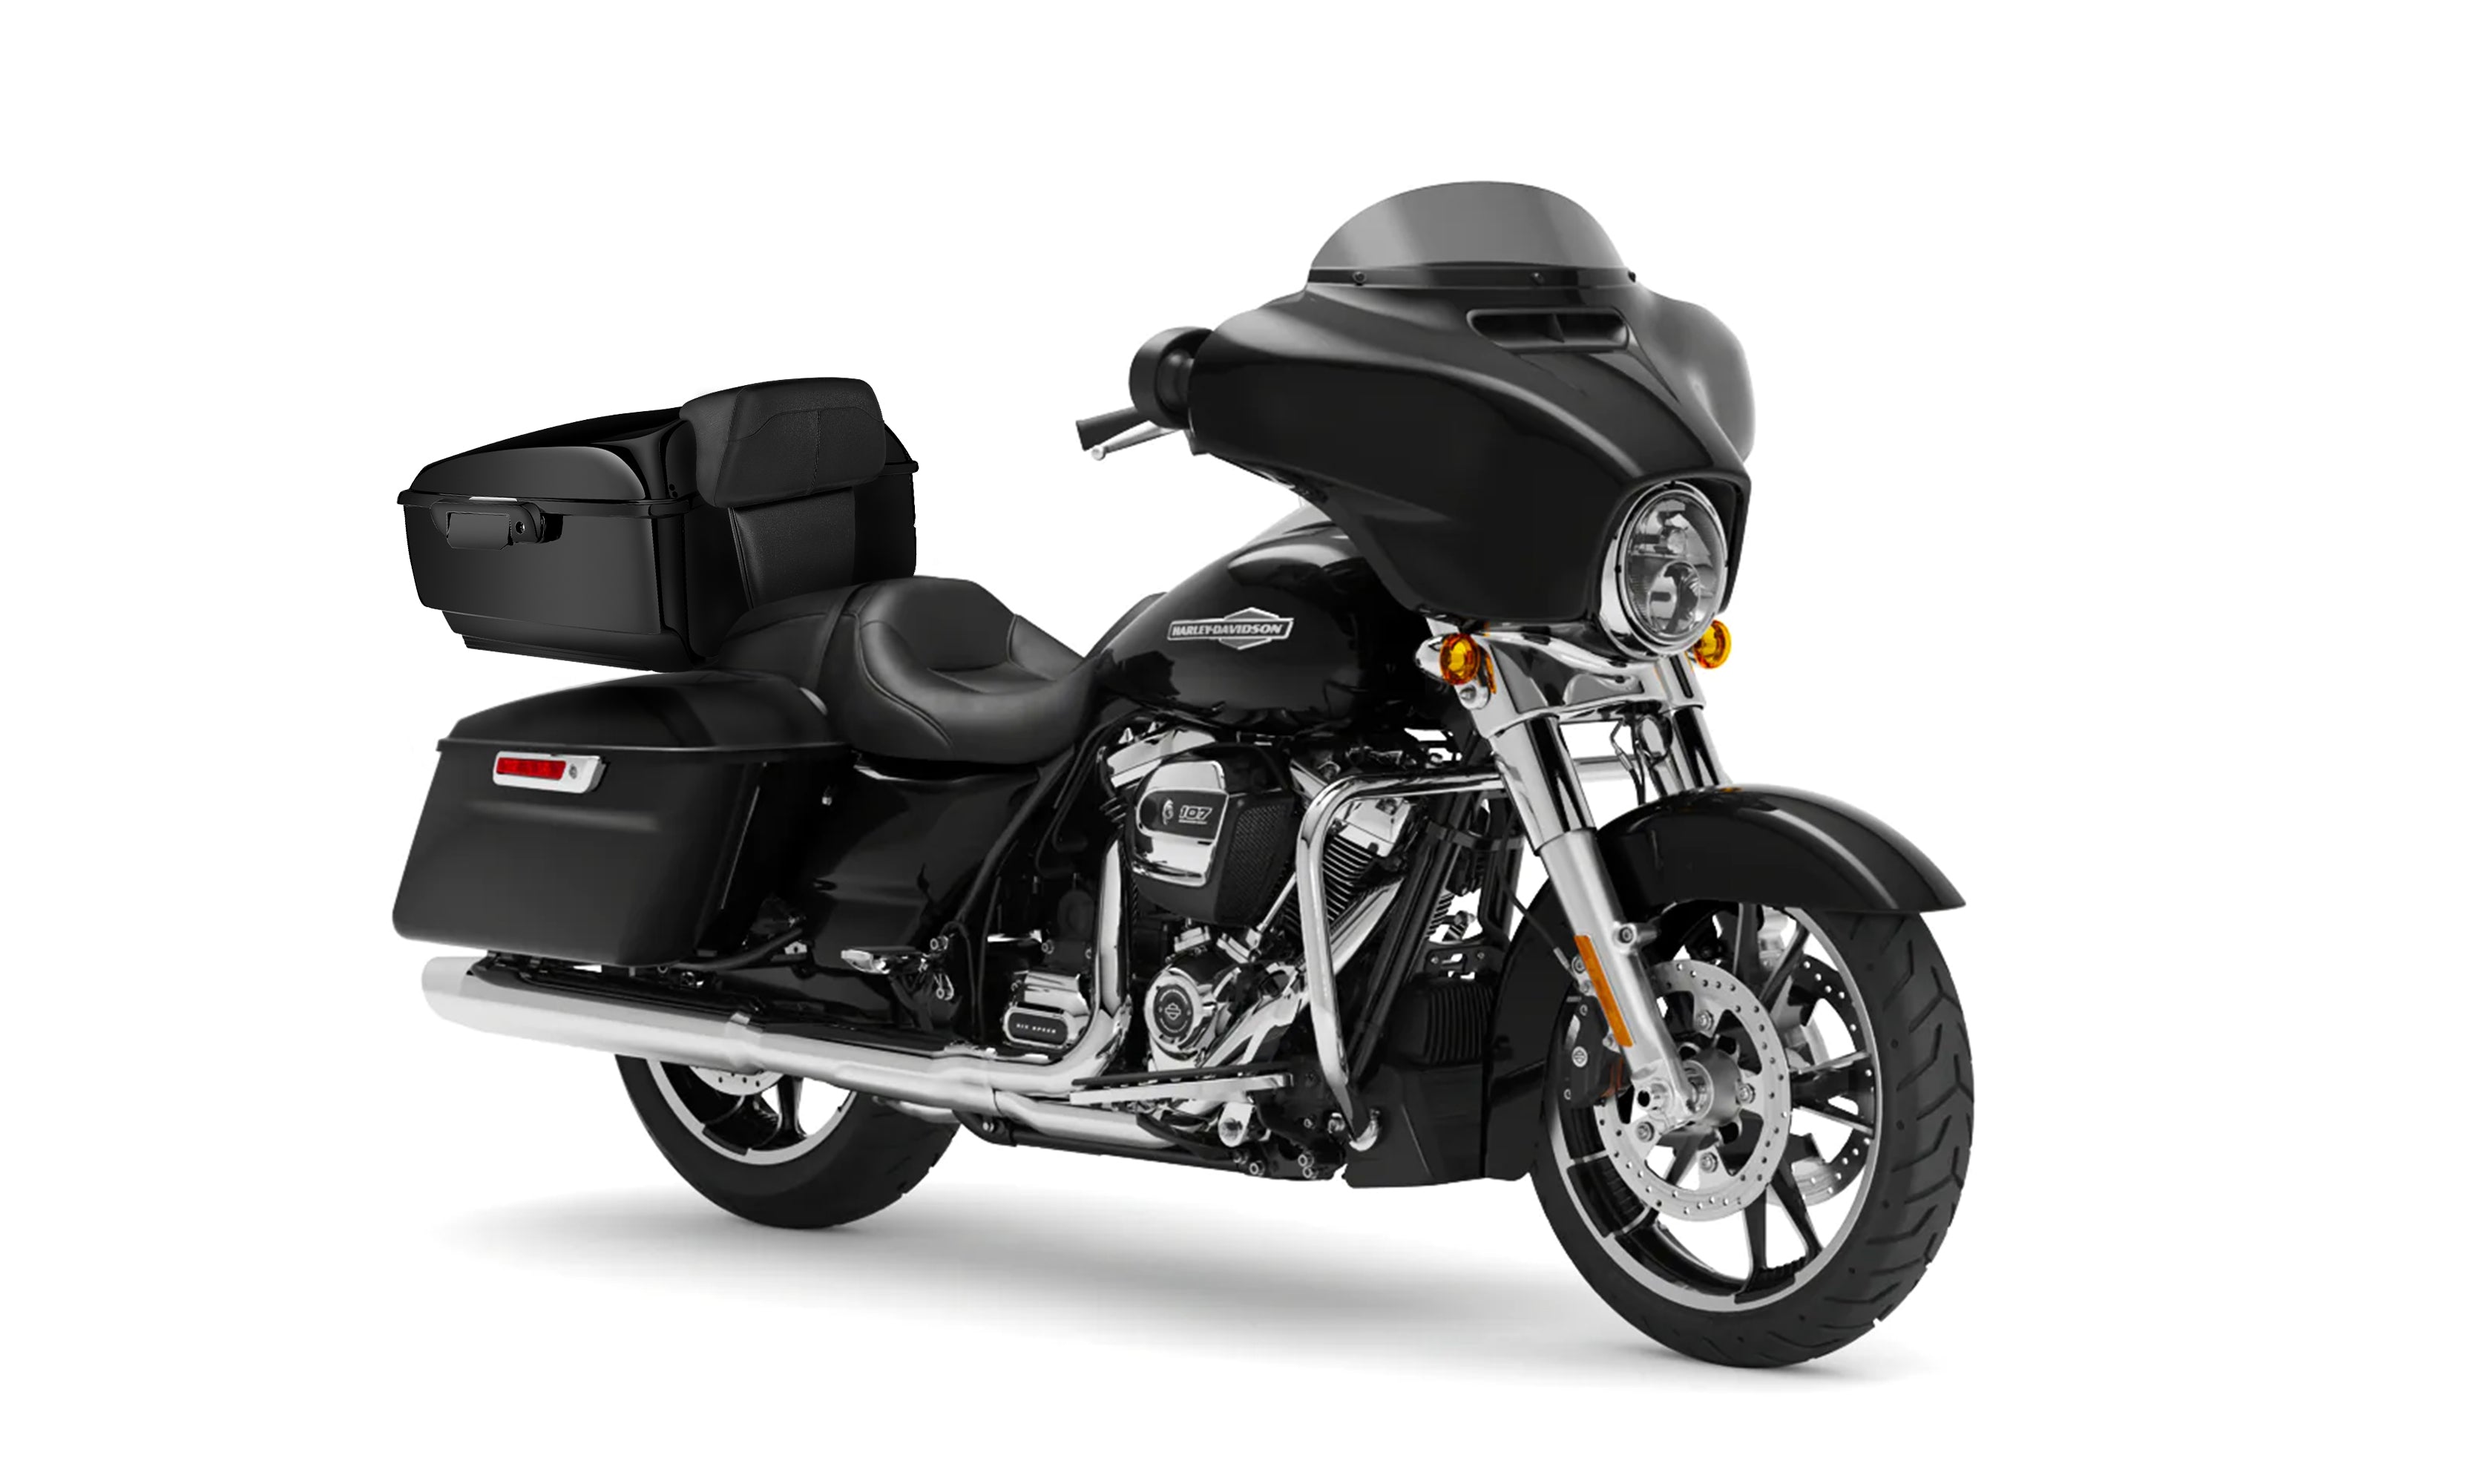 Viking Voyage Tour Pack Back Rest Pad For Harley Touring Street Glide Bag on Bike View @expand